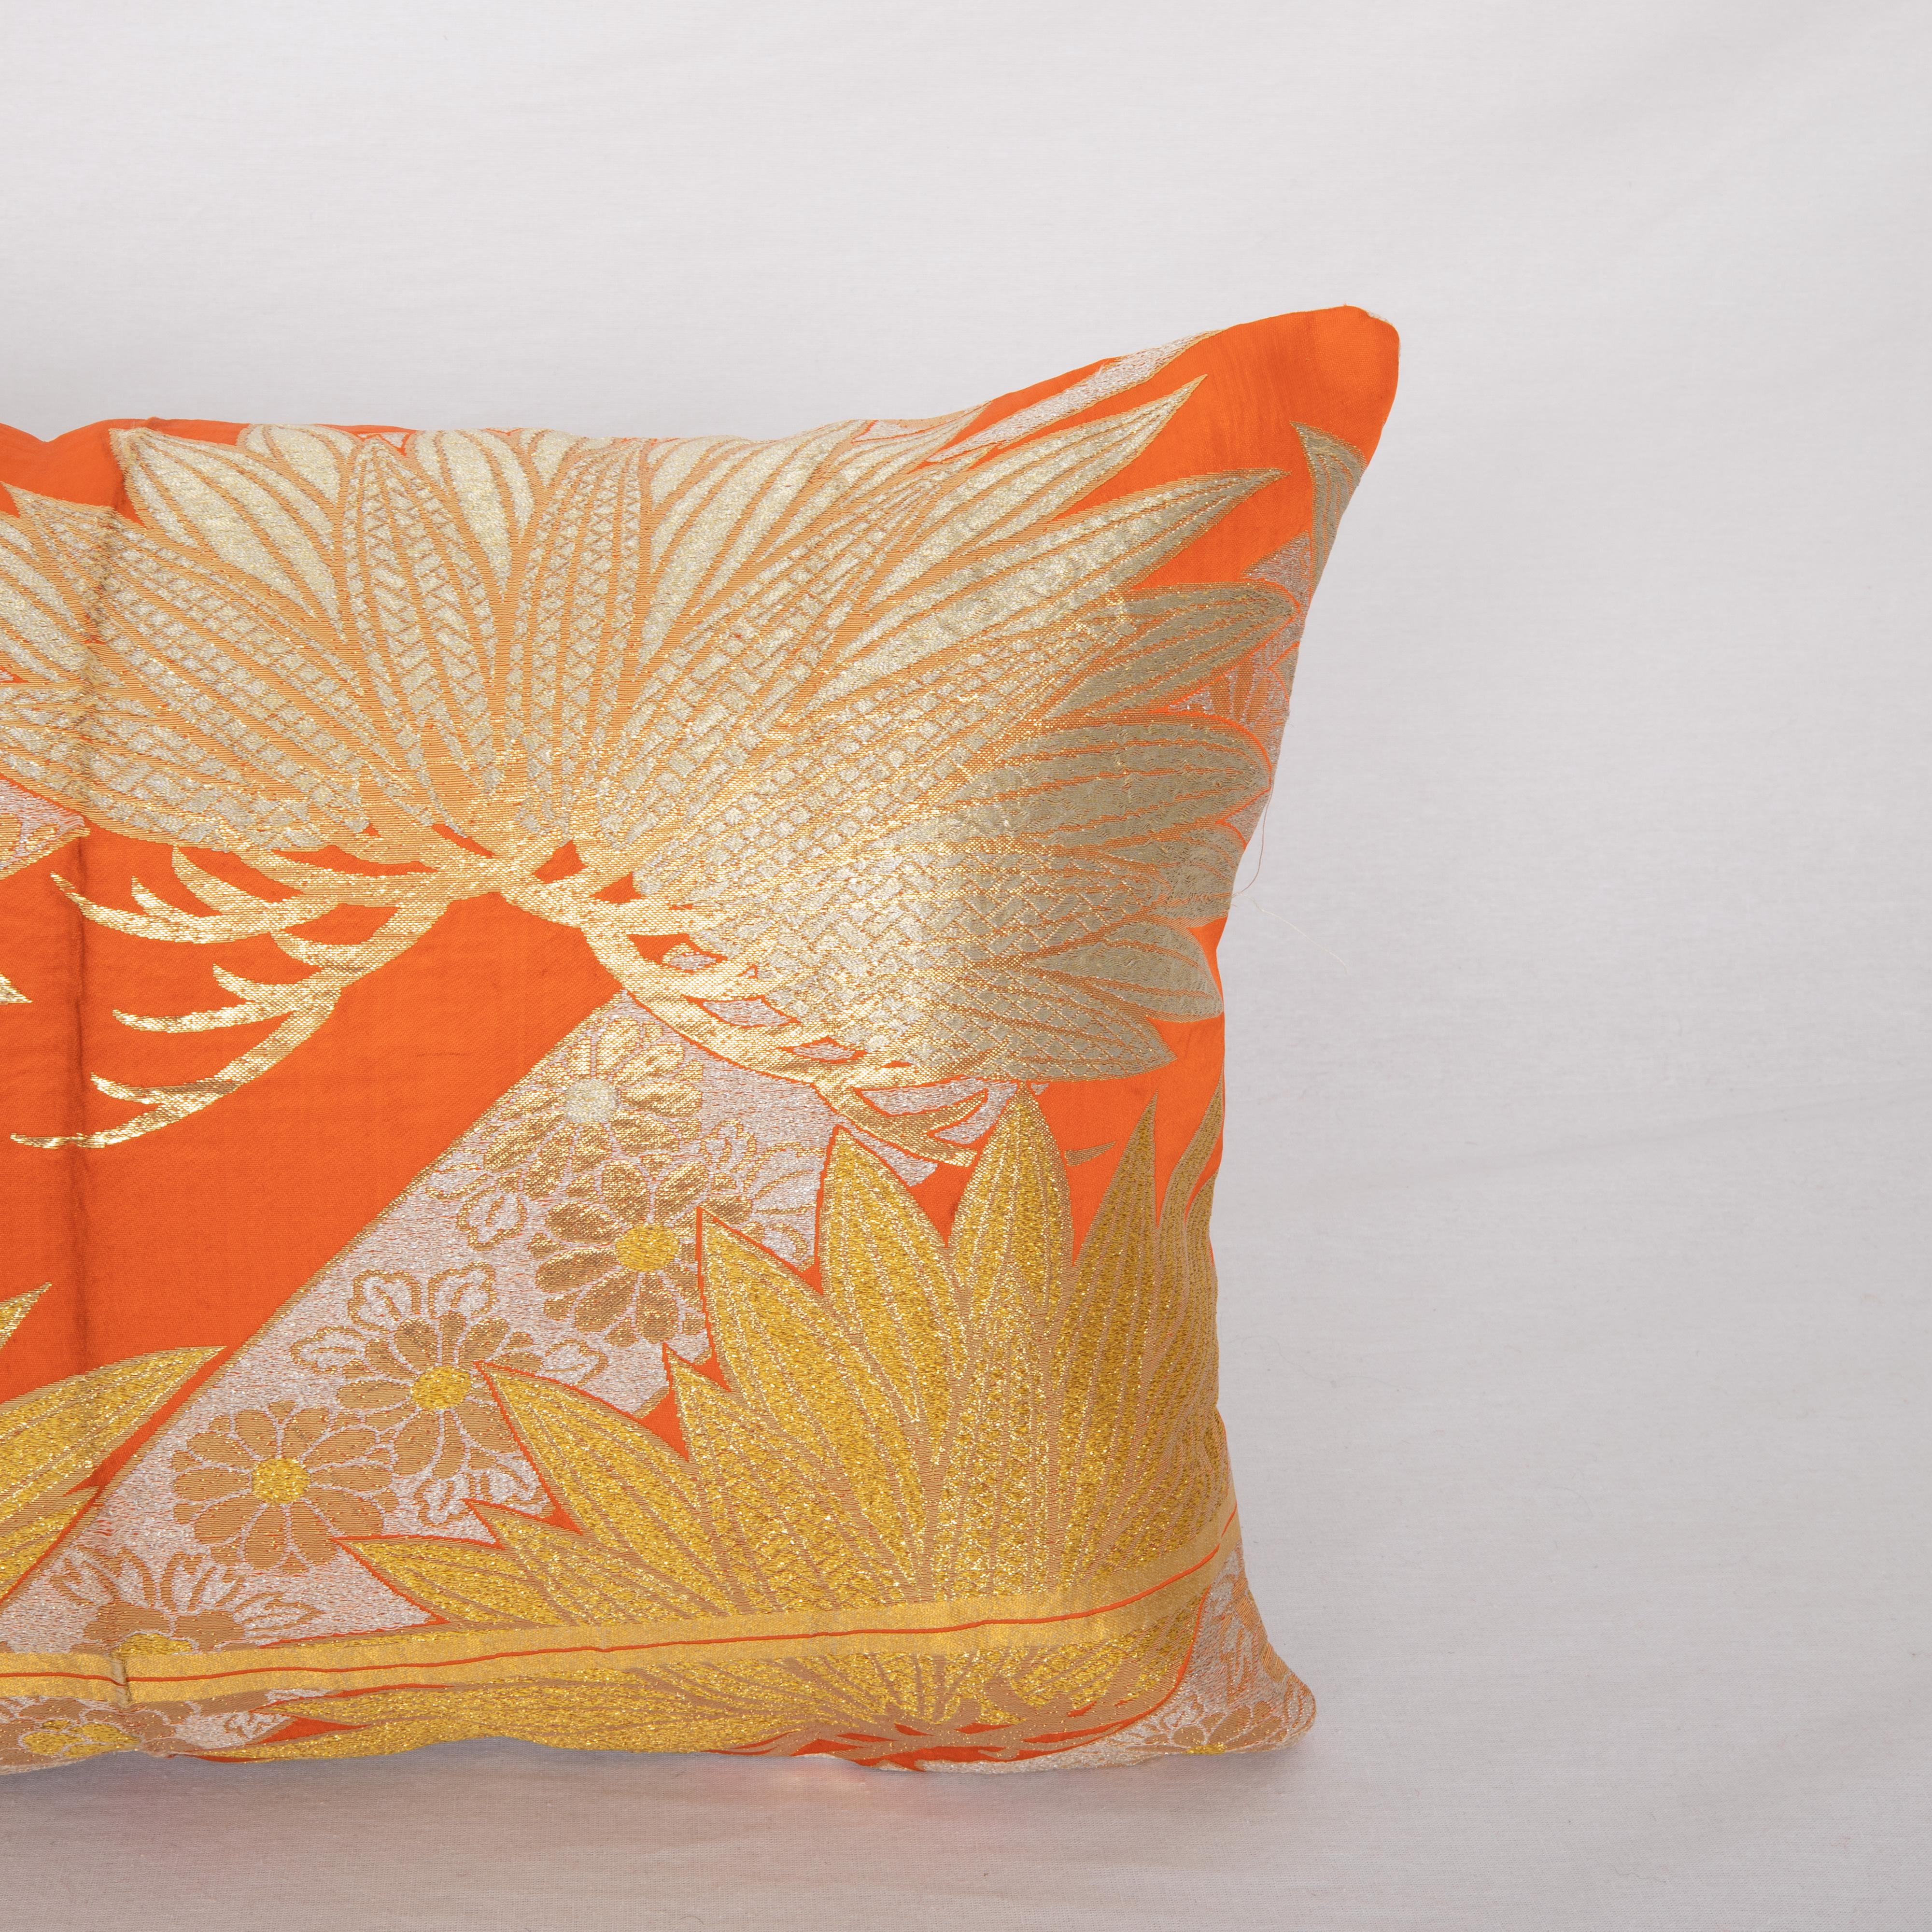 Woven Pillow Cover Made from a Vintage Obi, Japan For Sale